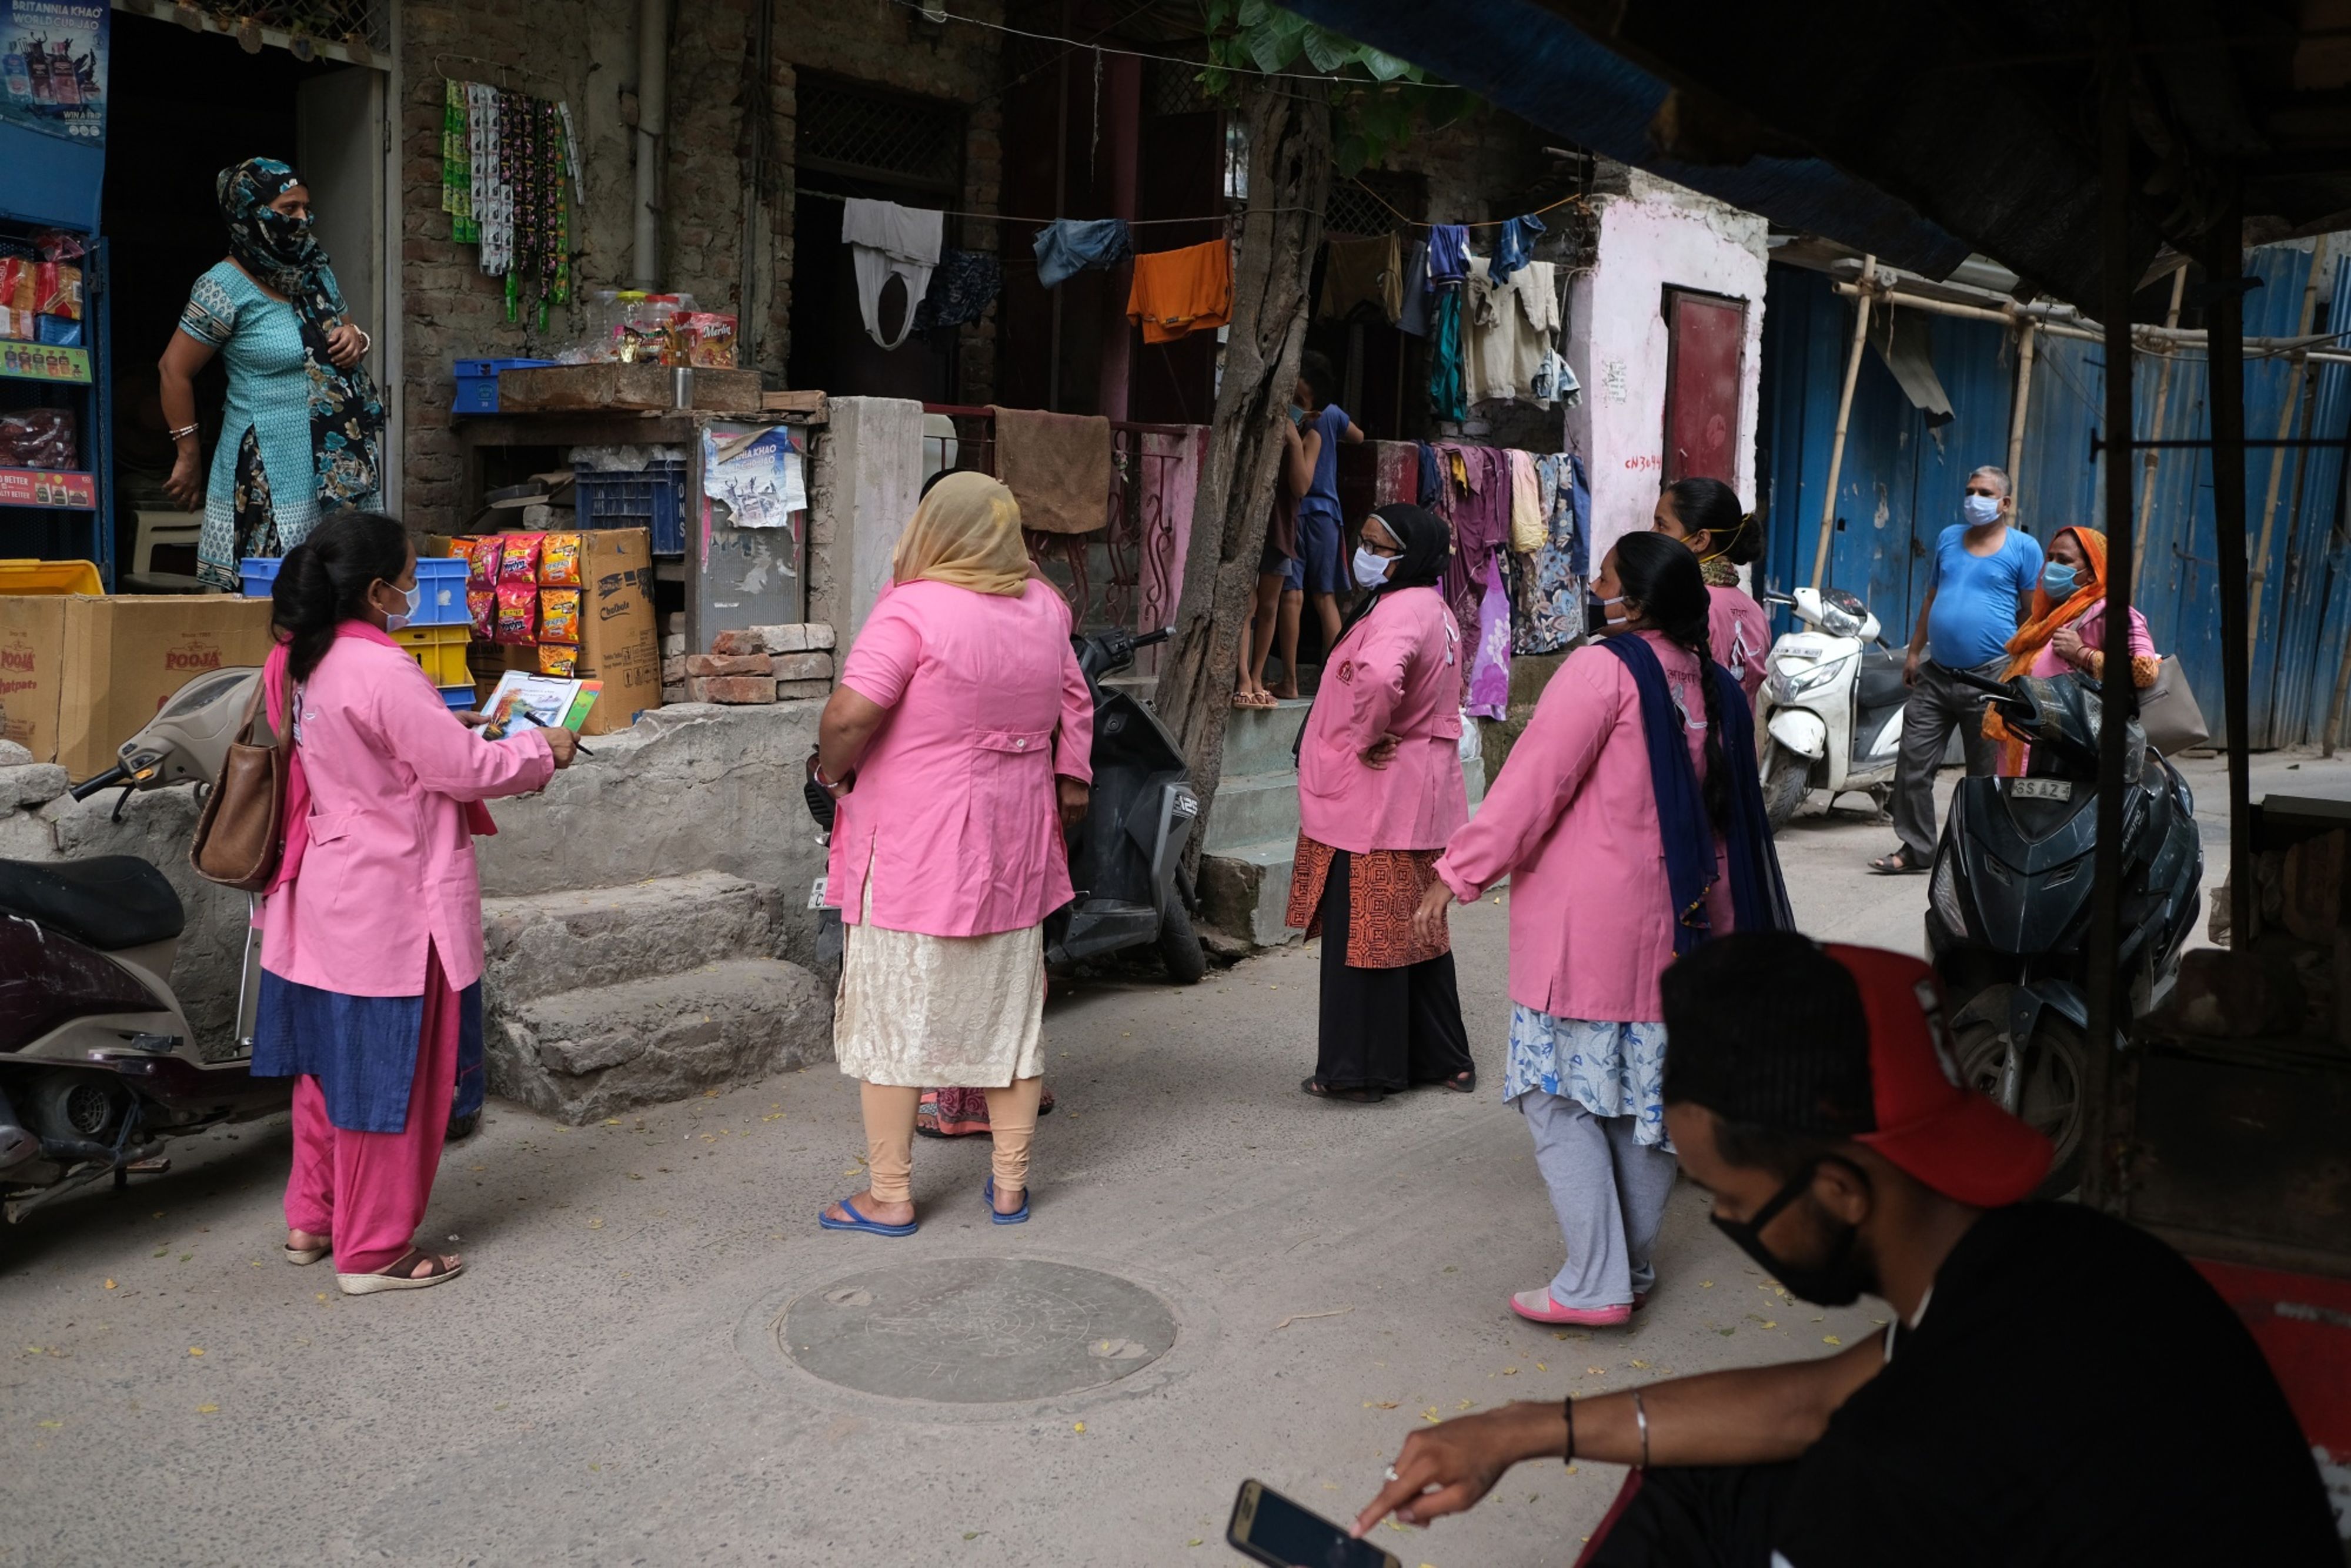 Accredited Social Health Activist (ASHA) workers from India's National Rural Health Mission wearing pink robes and protective masks, talk to a resident, left, as they conduct a door-to-door survey on the coronavirus in New Delhi, India, on July 2, 2020. (© 2020 Bloomberg Finance LP)